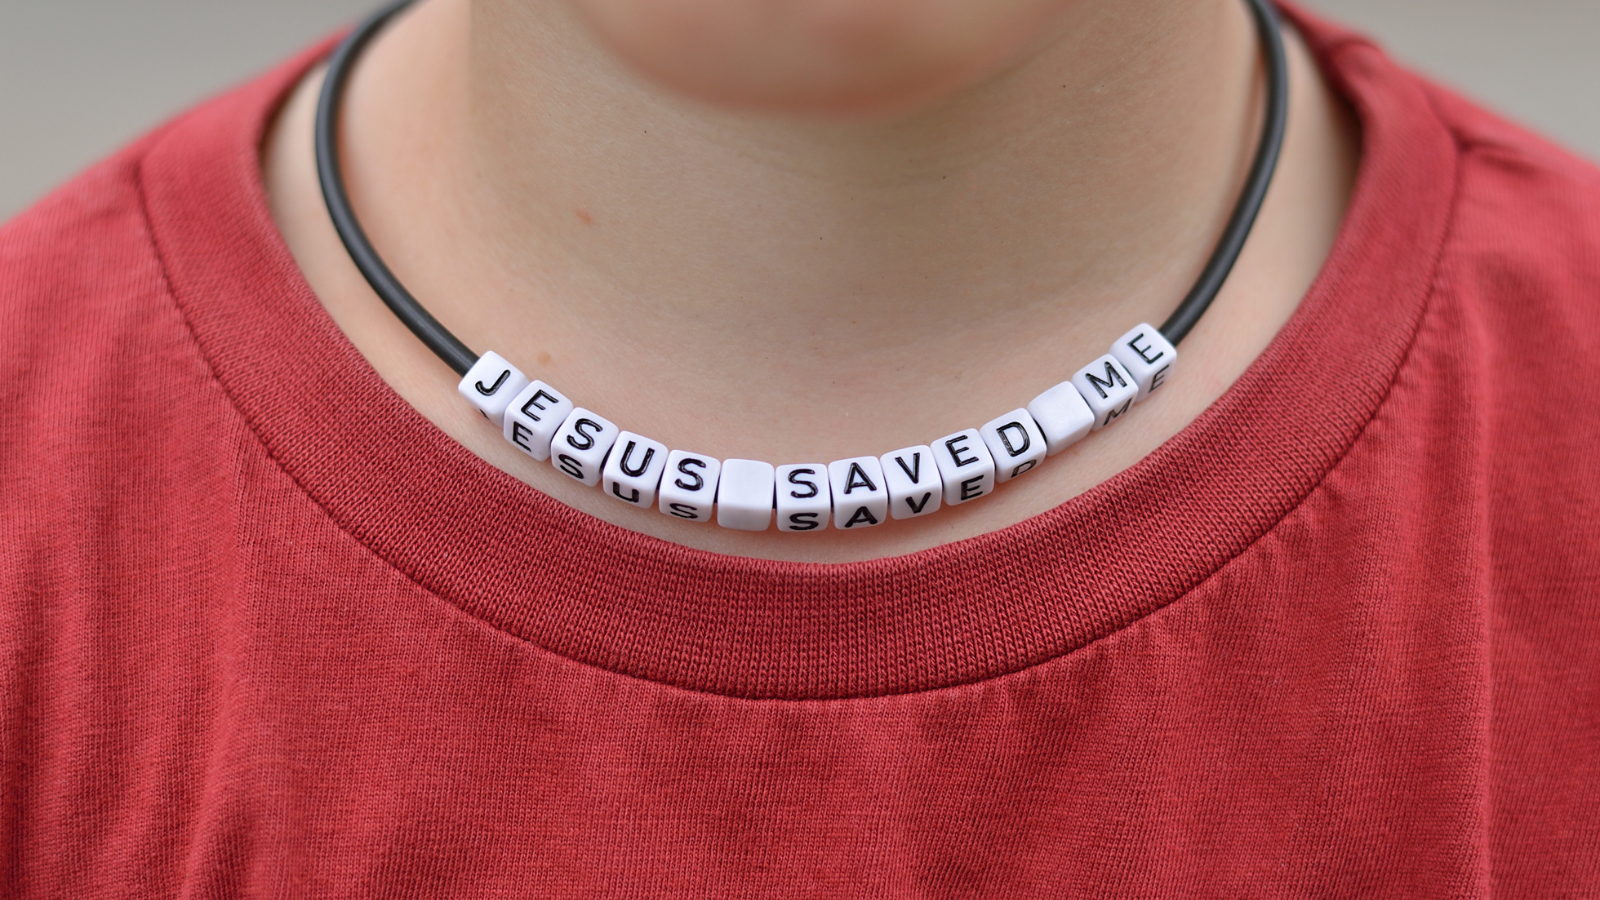 Boy with Jesus Saved Me necklace